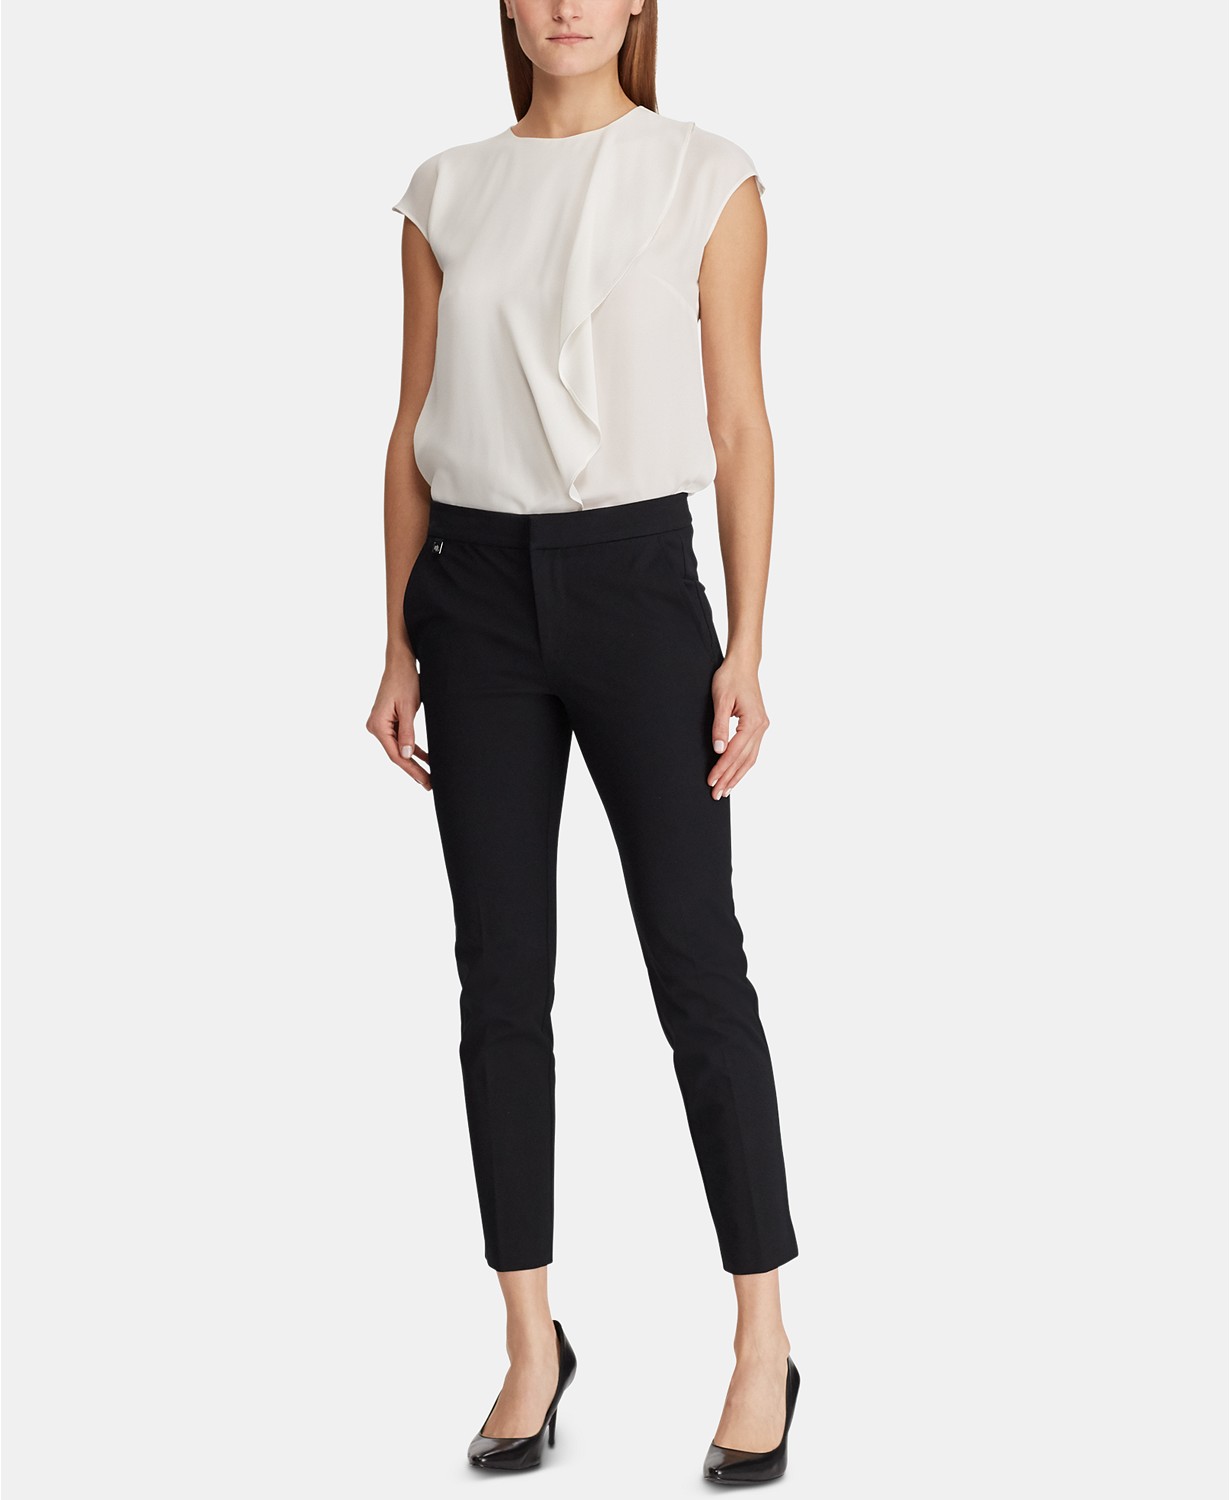 These Ralph Lauren Skinny Pants Are on Sale This Weekend Only!